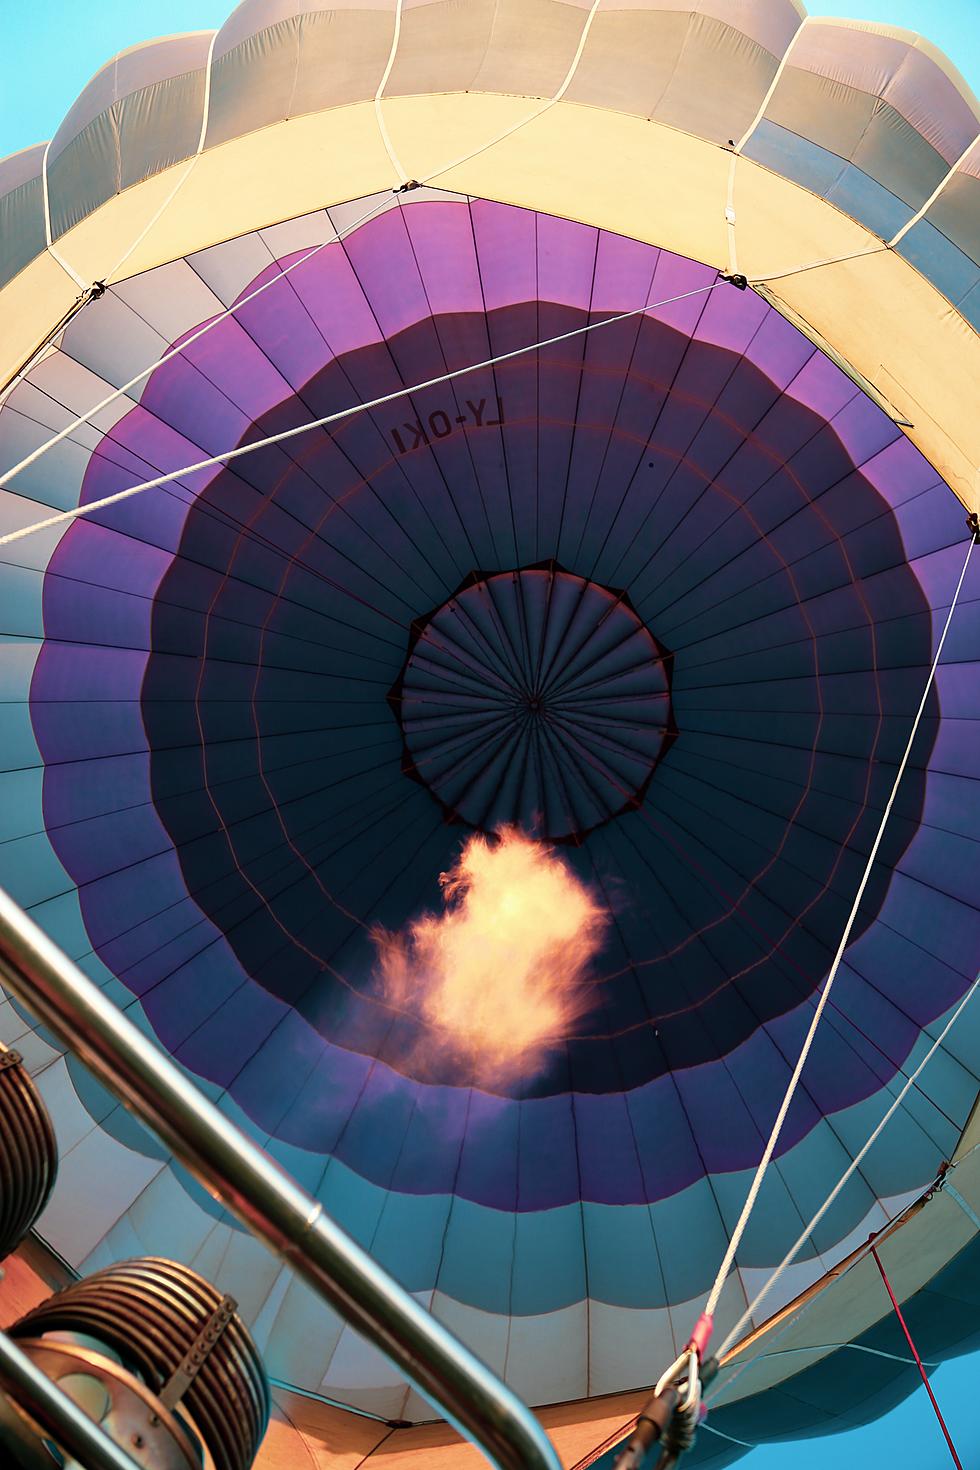 Full of Hot Air! Hot Air Balloon Festival Is This Weekend In MN